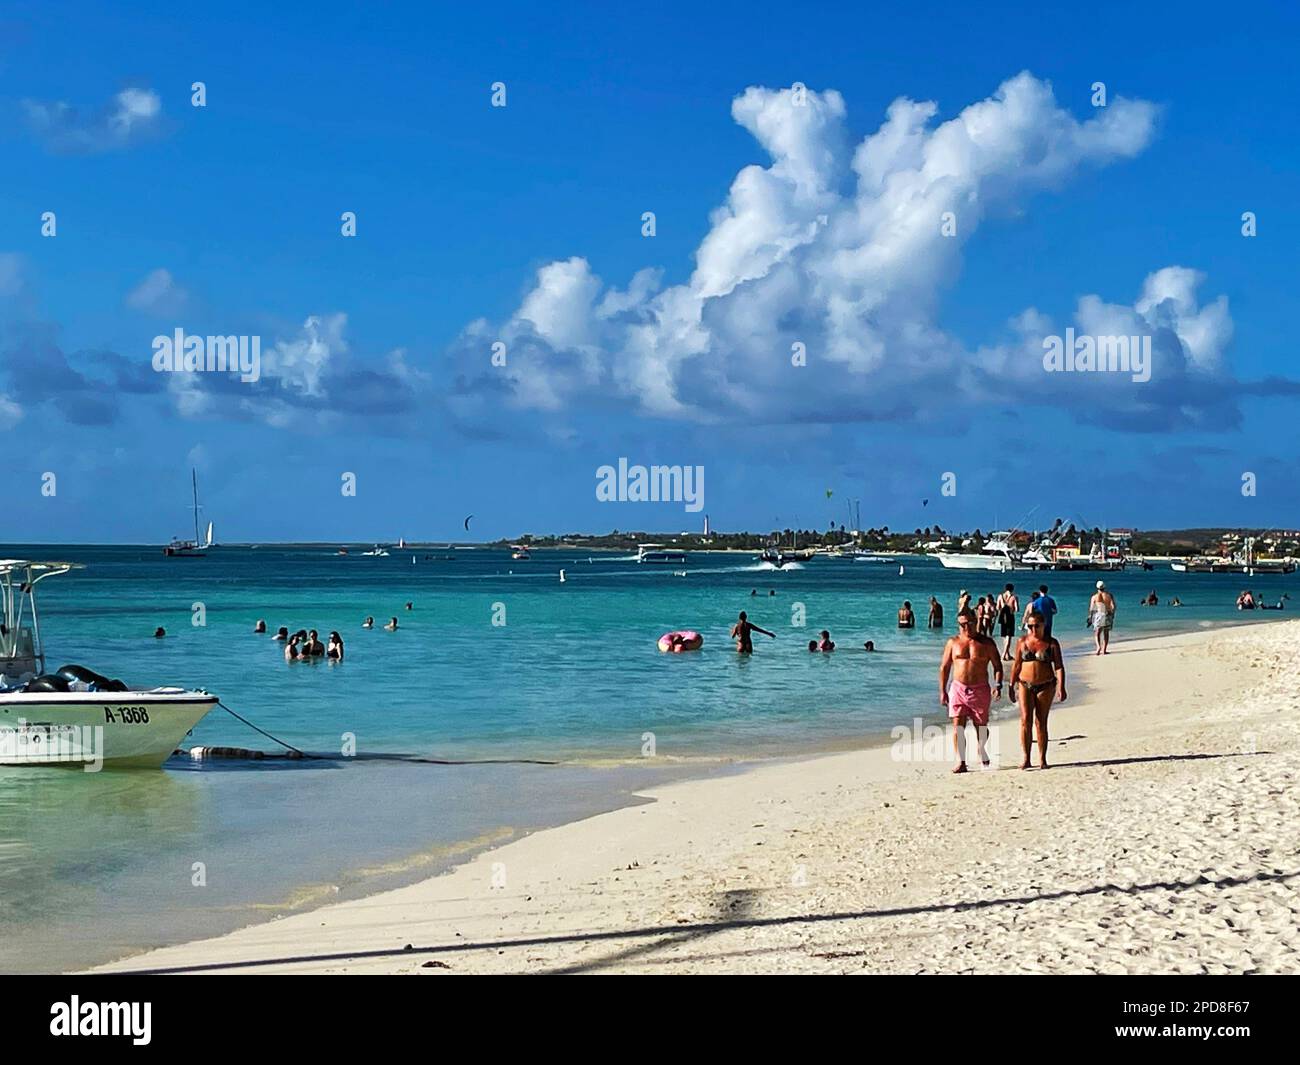 Palm Beach, Noord, Aruba - March 10, 2022. People on the beach and in the water. Hotels, resorts and boats in the background. Stock Photo